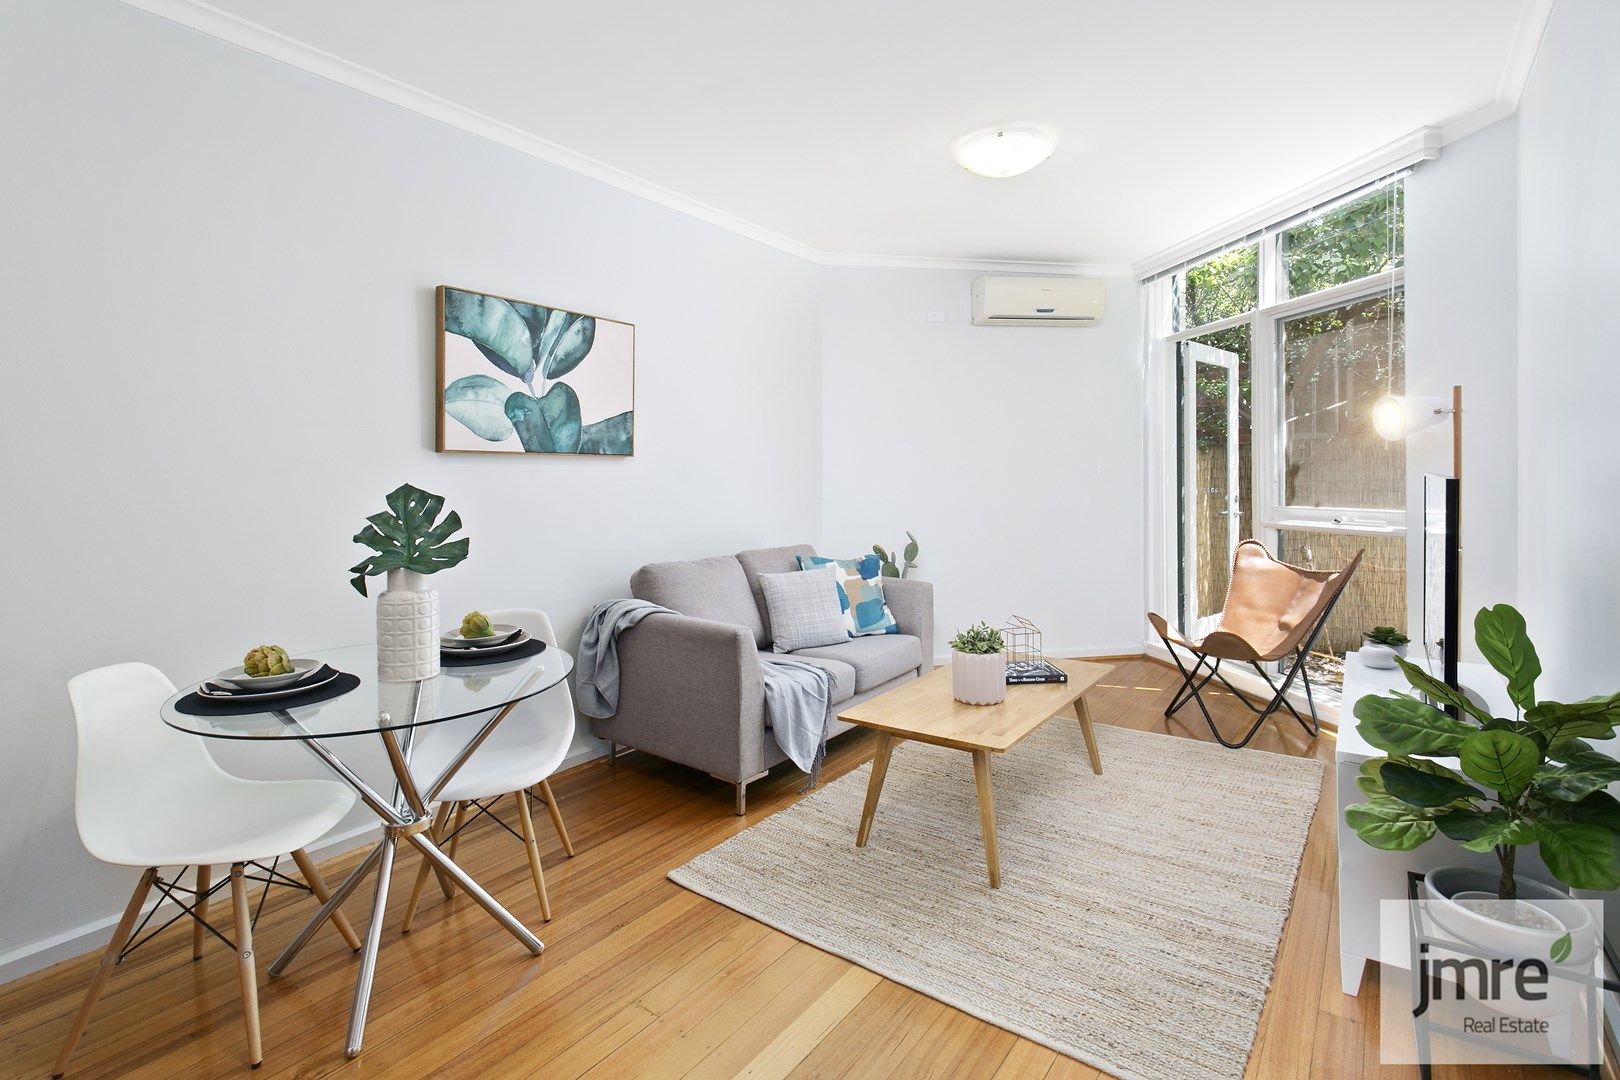 2 bedrooms Apartment / Unit / Flat in 2/77 Chapman Street NORTH MELBOURNE VIC, 3051